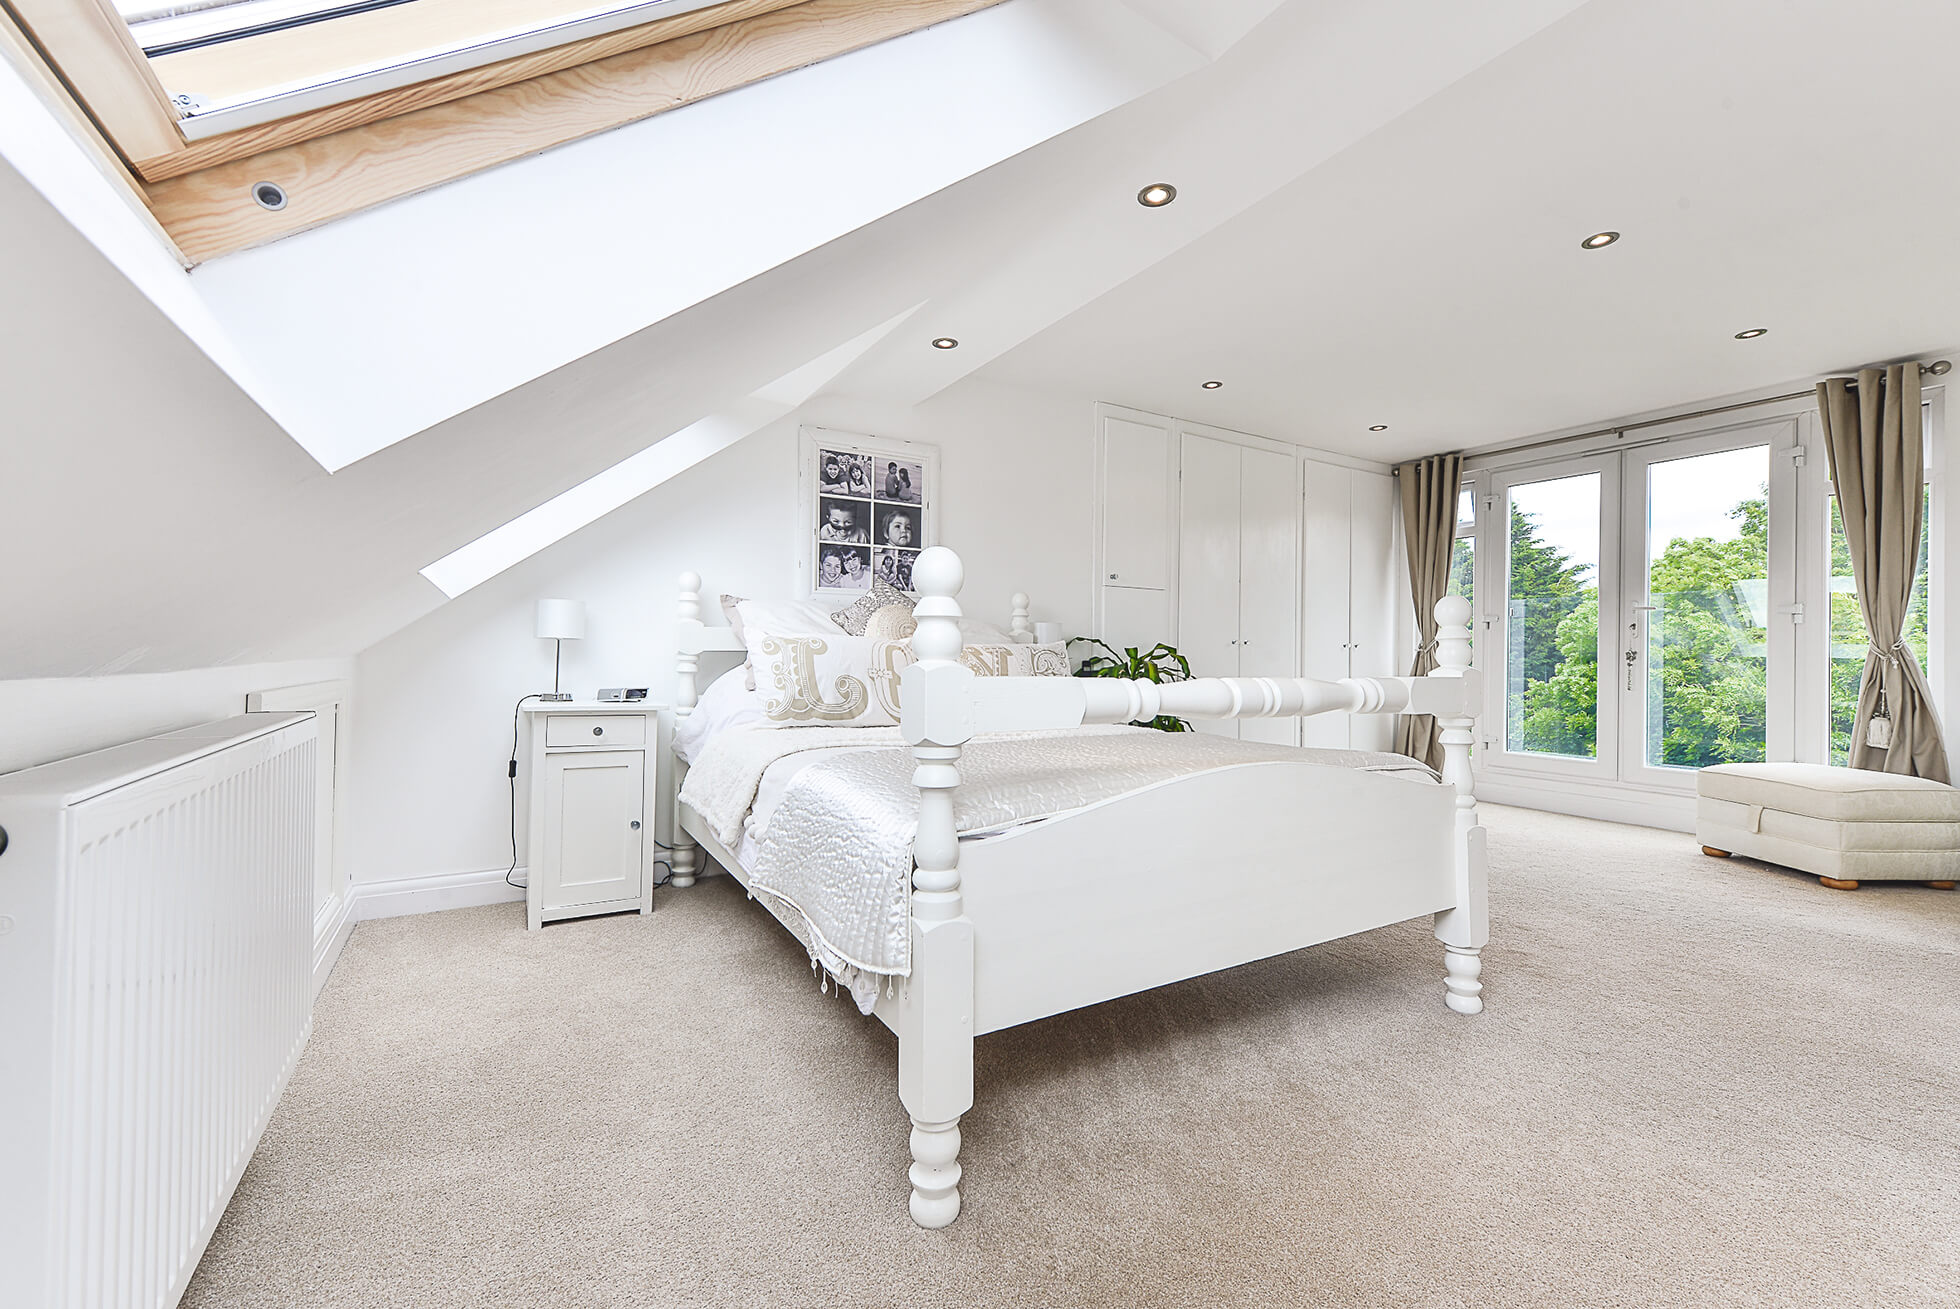 Do you have a question about converting your Loft in Potten End? Here are the most popular questions asked by our clients.